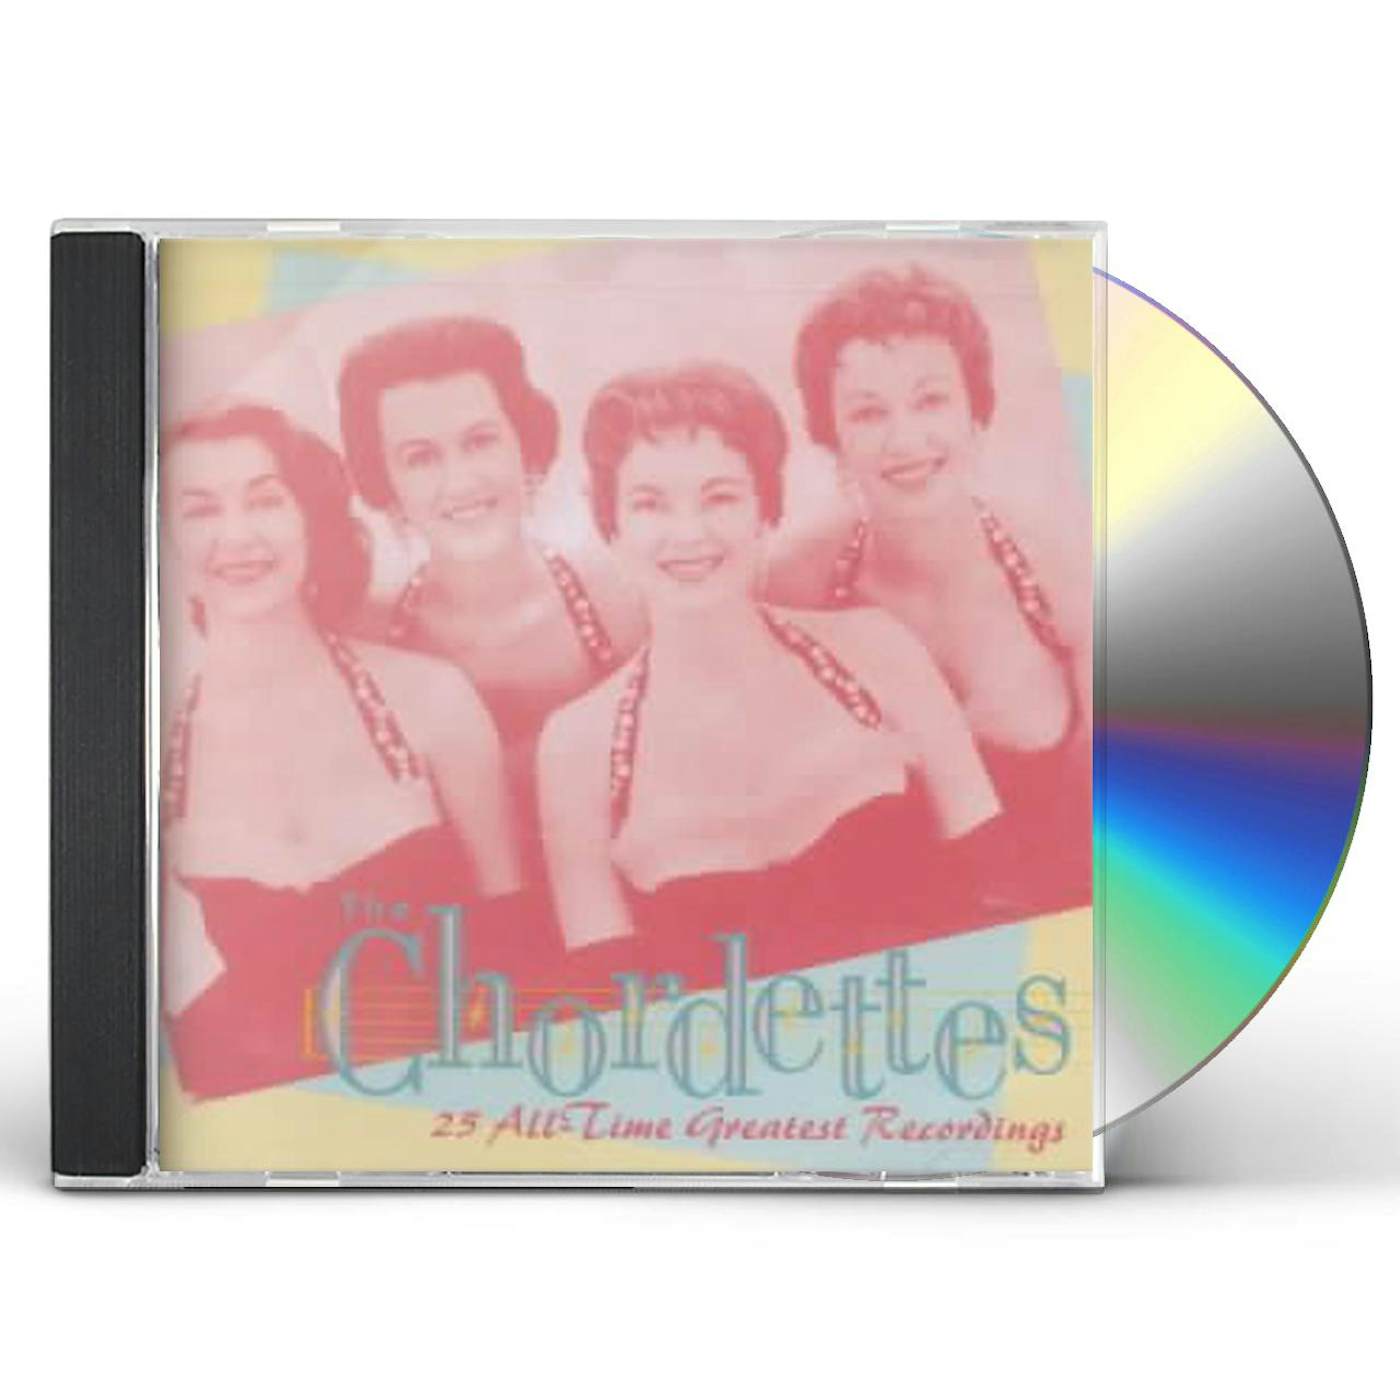 The Chordettes 25 ALL-TIME GREATEST RECORDINGS CD